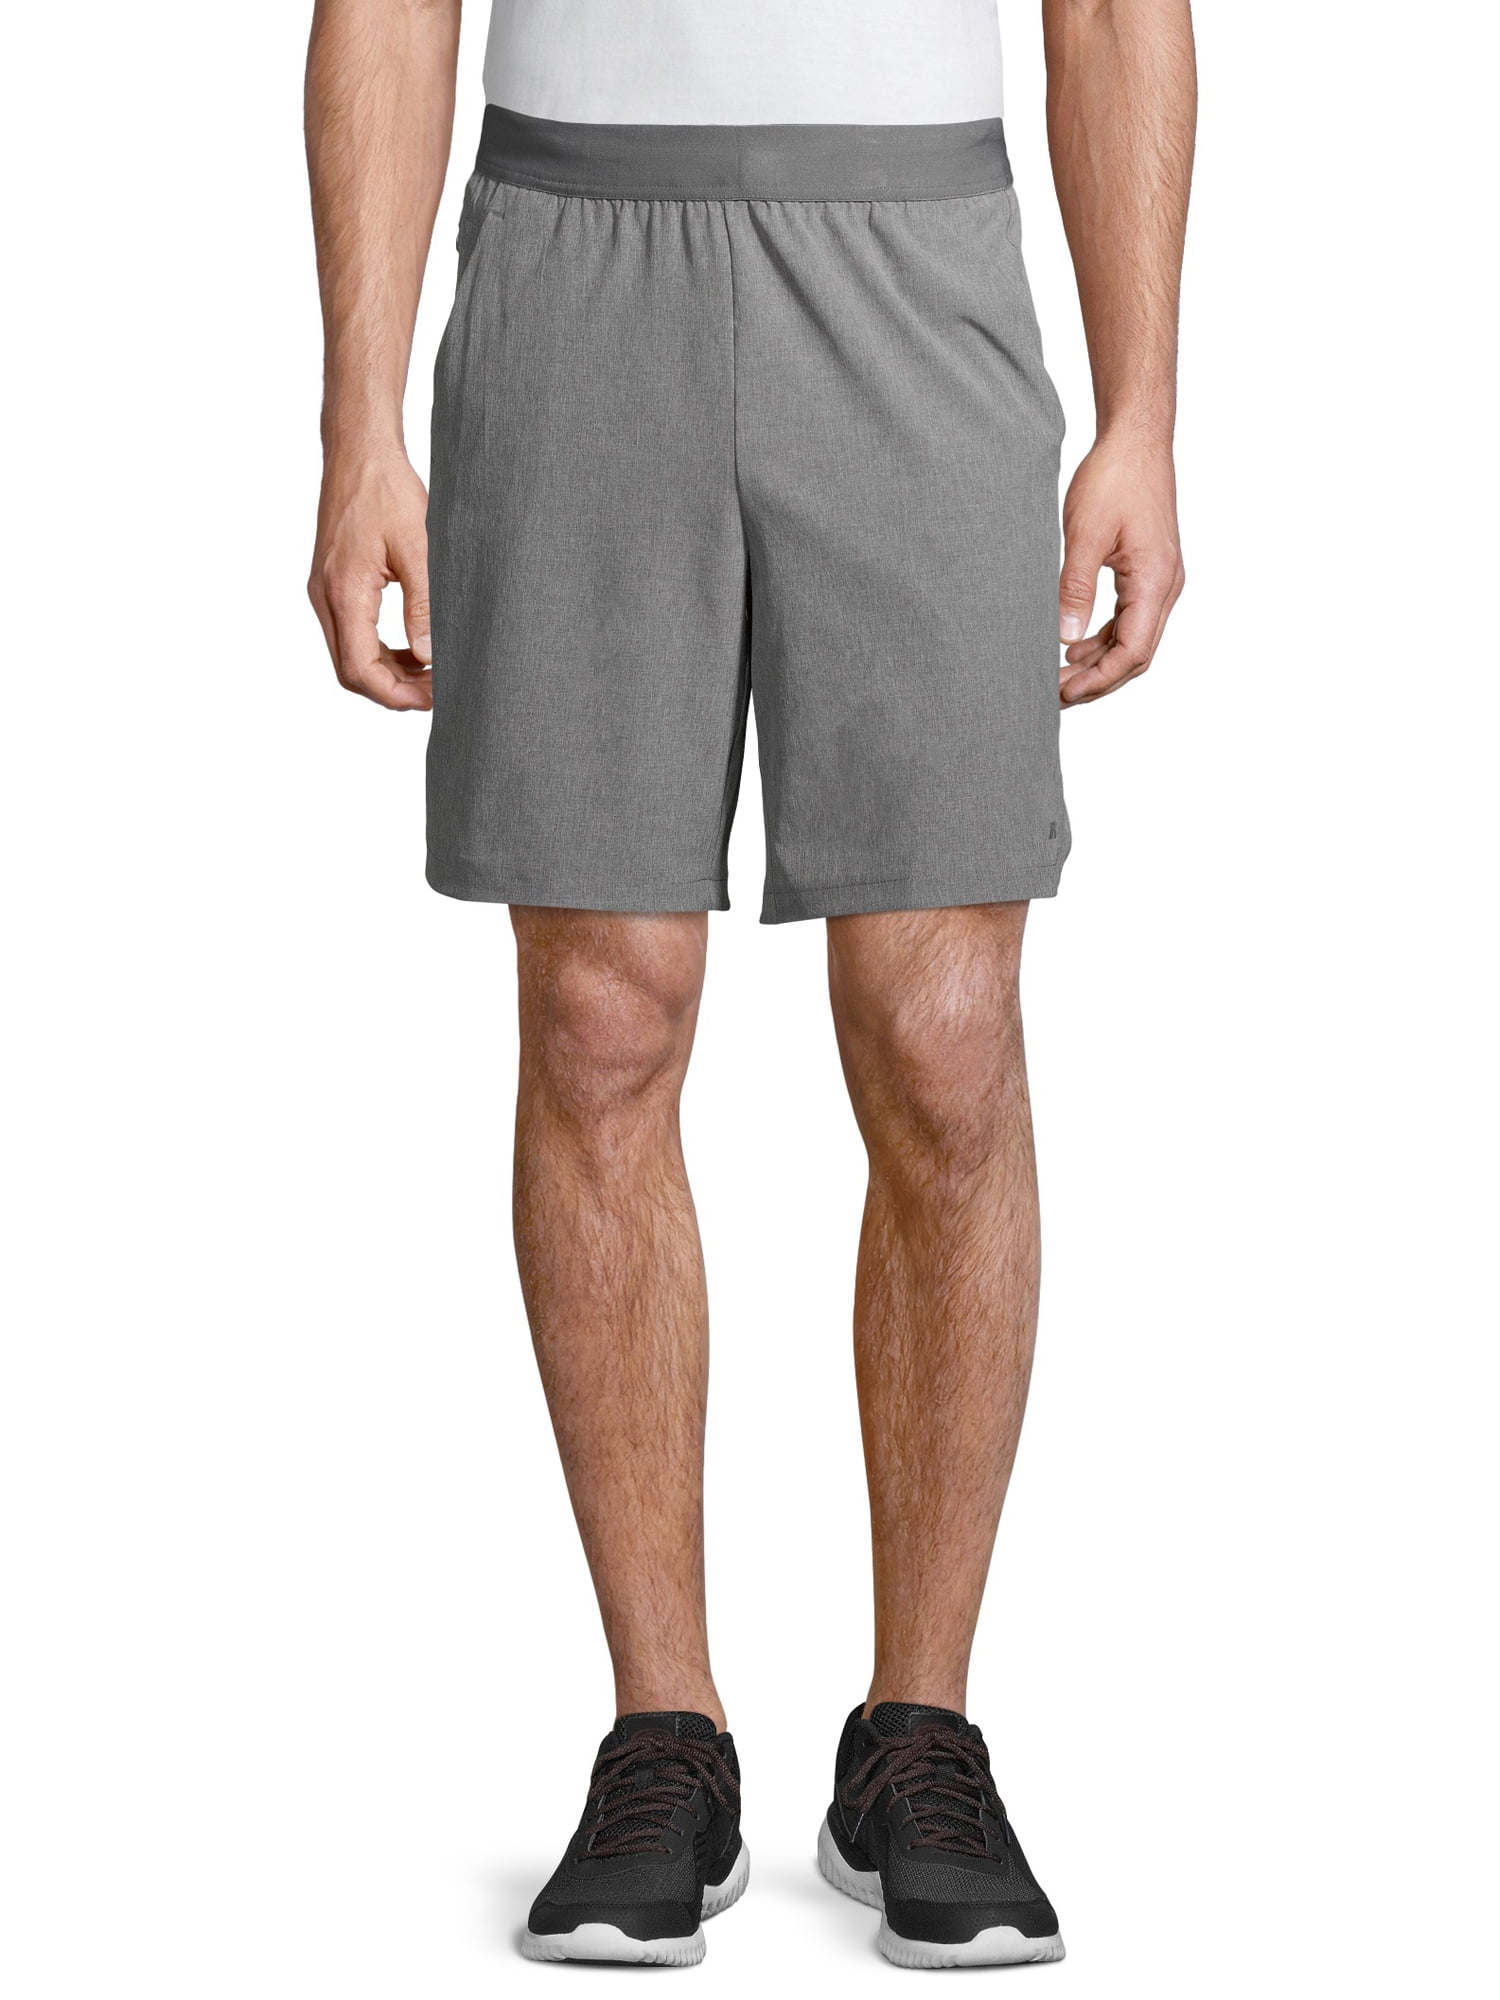 Russell - Russell Men's and Big Men's Woven Tech Shorts, up to 5XL ...